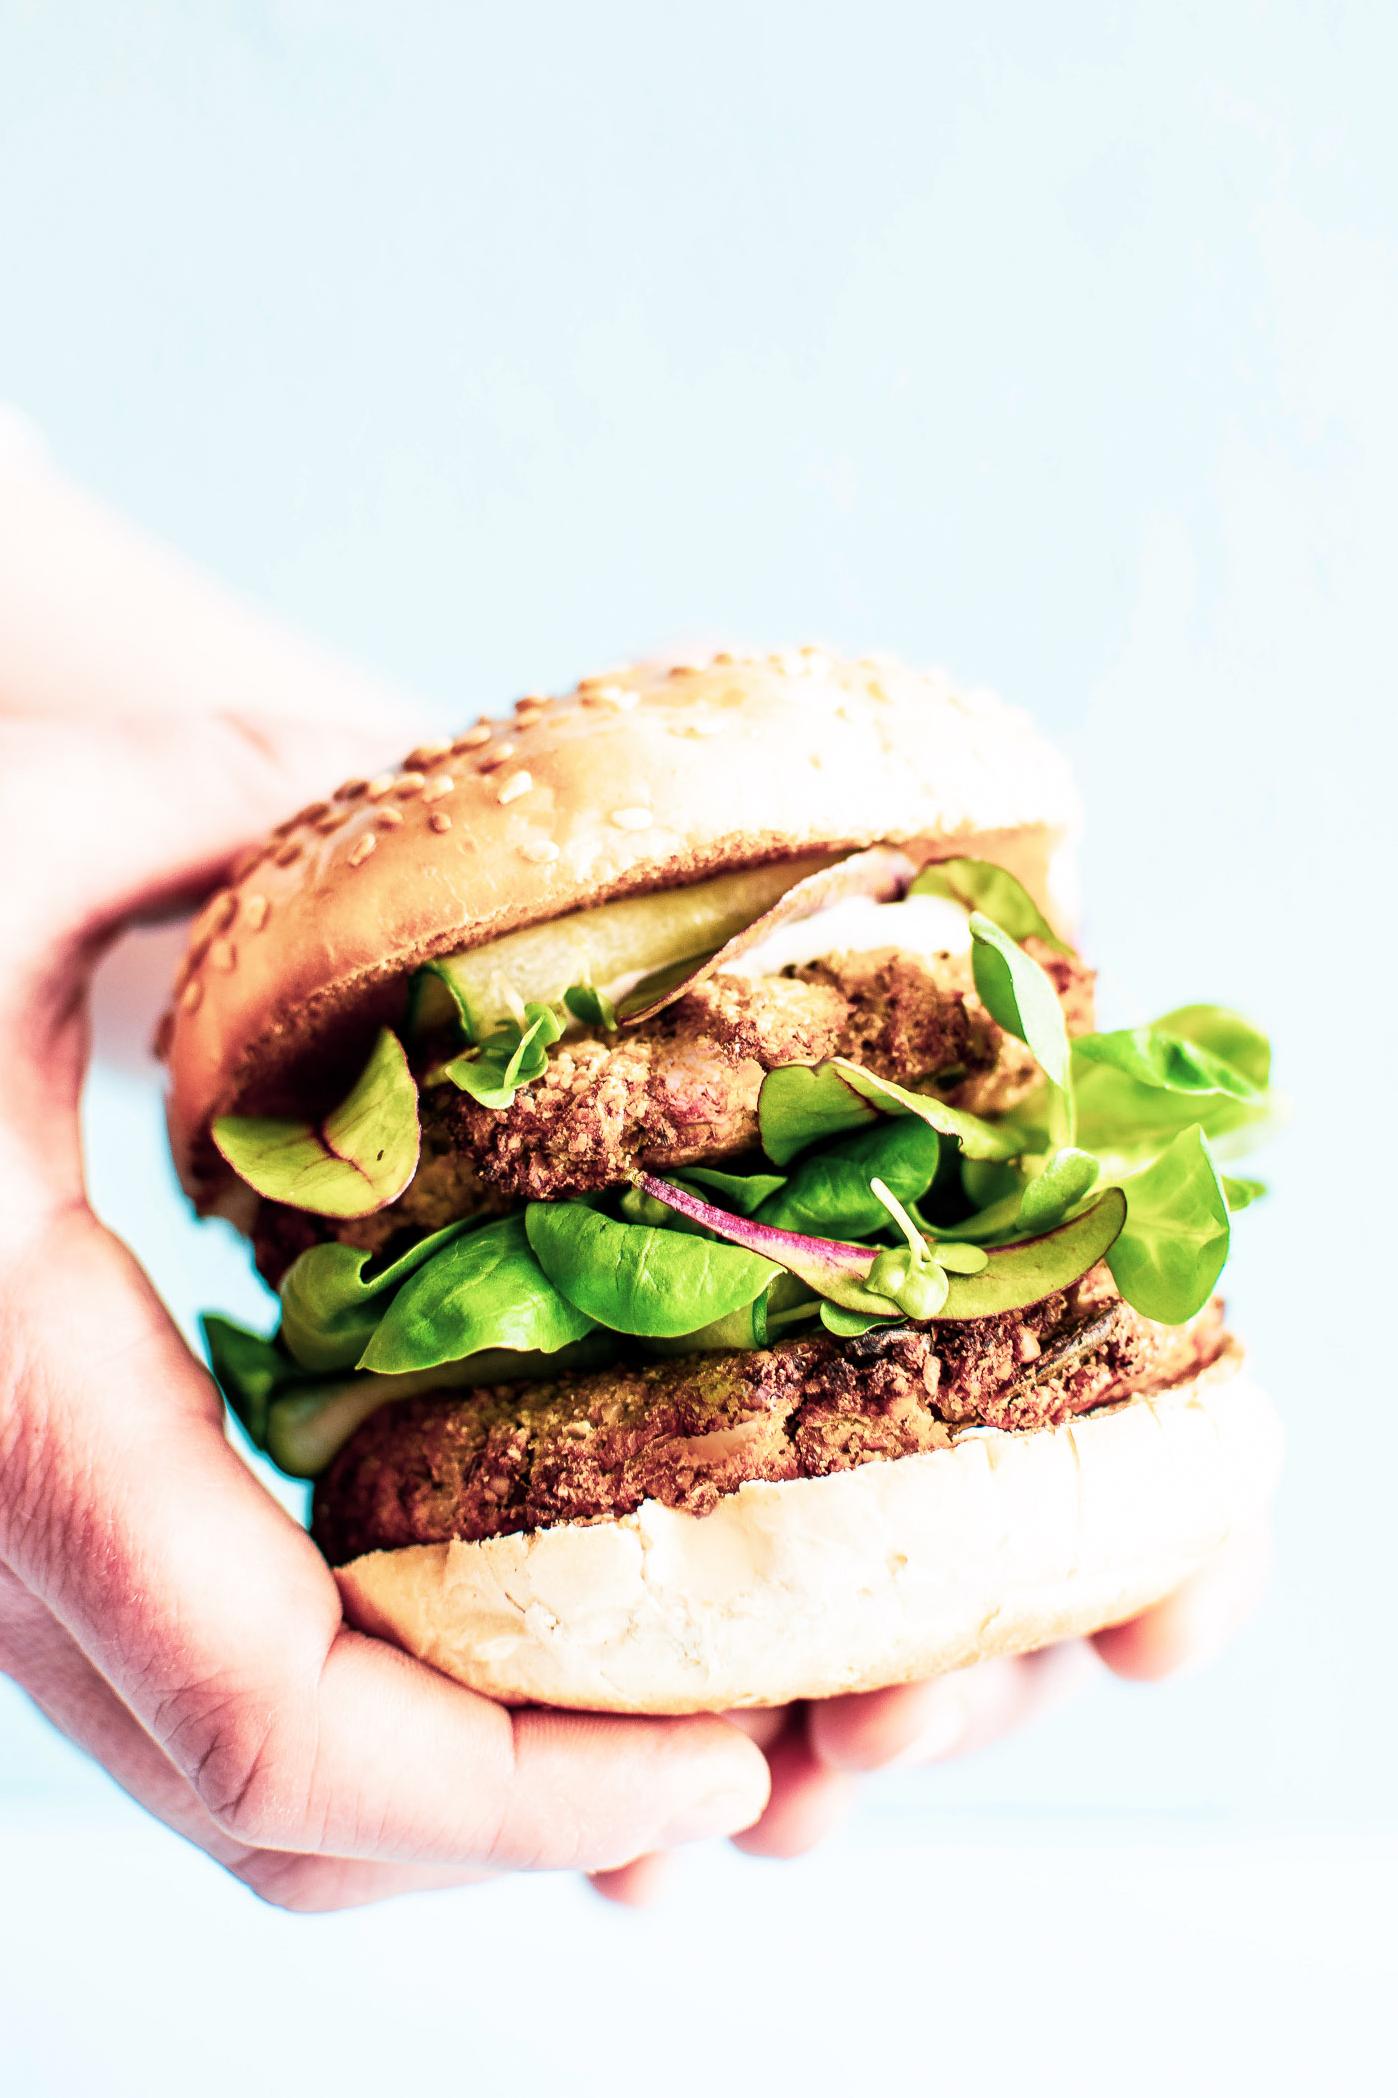  Once you try these veggie burgers, you won't ever go back to meat burgers.